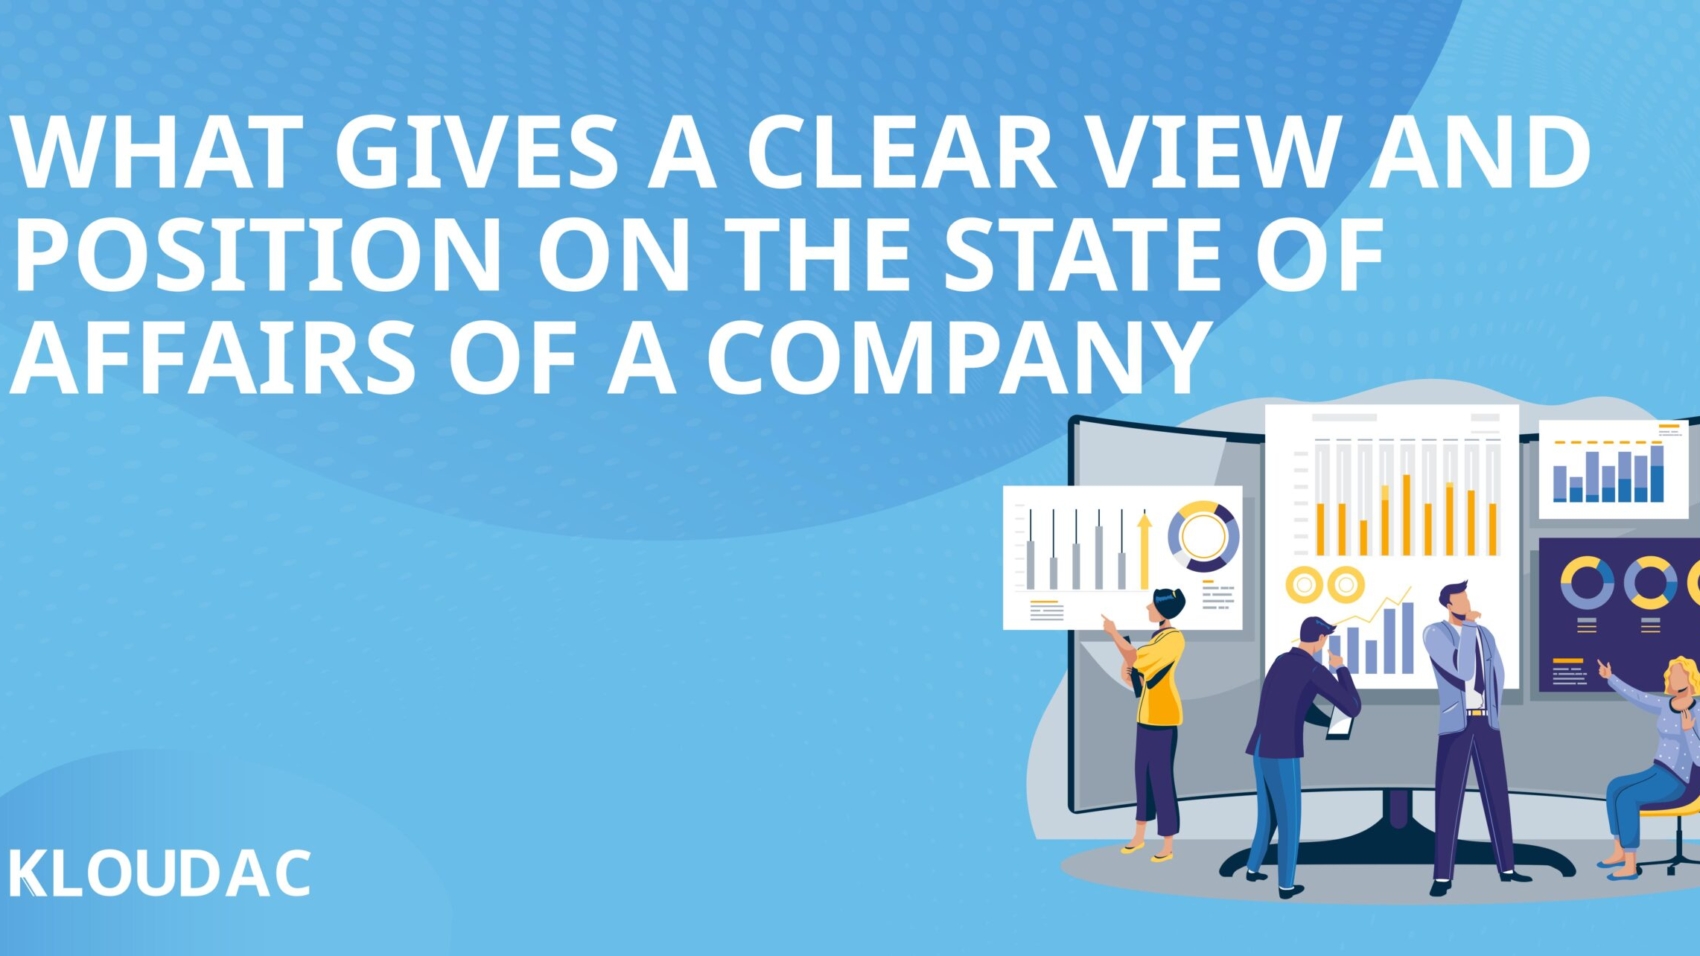 What gives a clear view and position on the state of affairs of a company